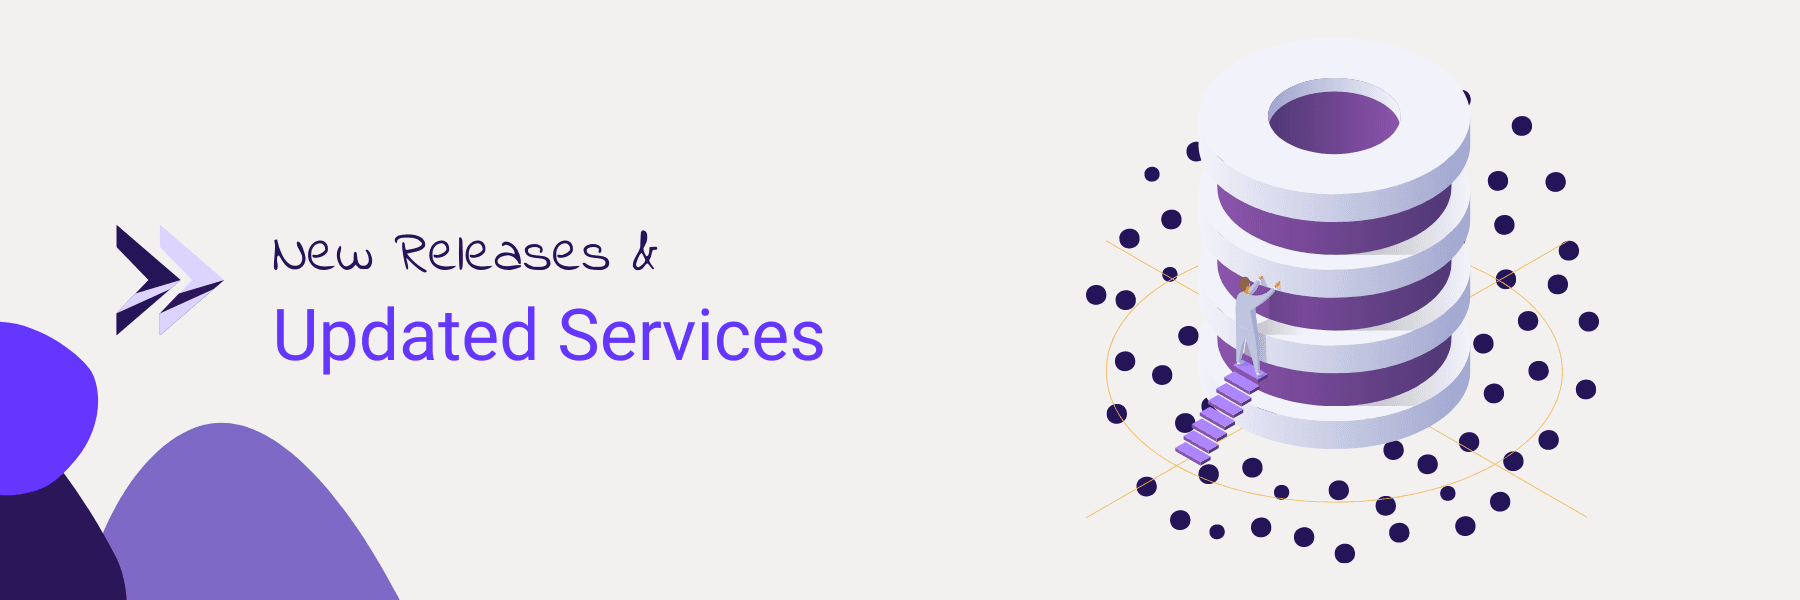 New Releases & Updated Services